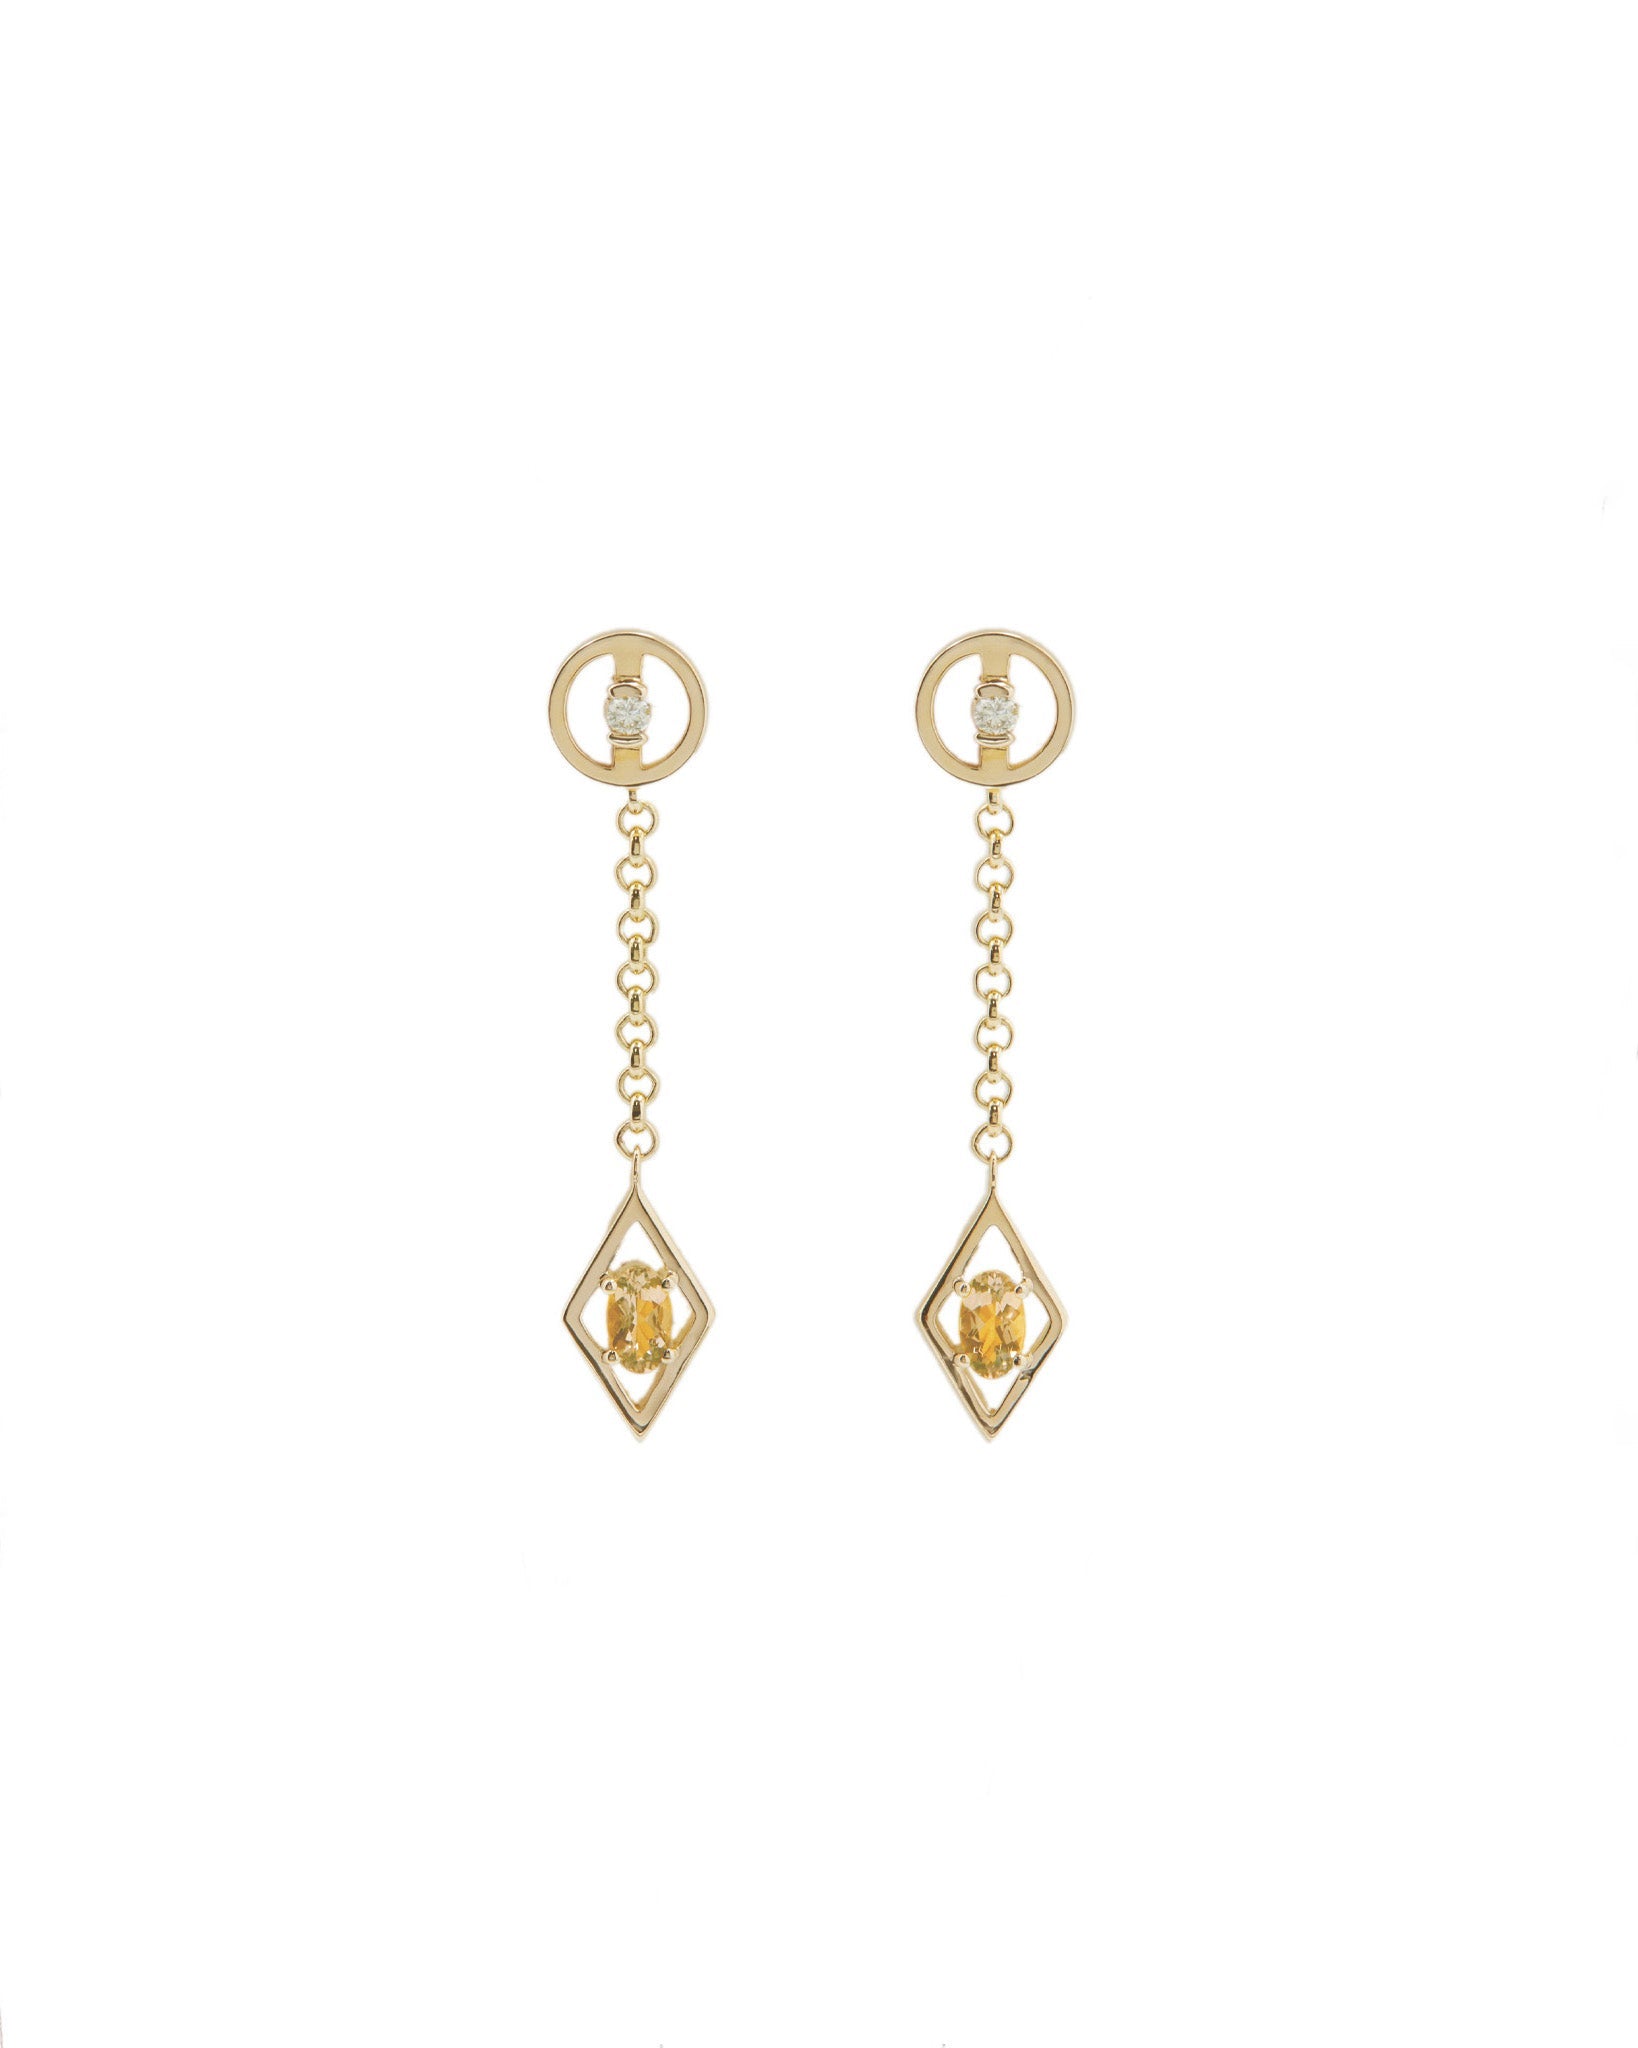 Shop 20 Styles of handcrafted Earrings in our Earrings Collection ...